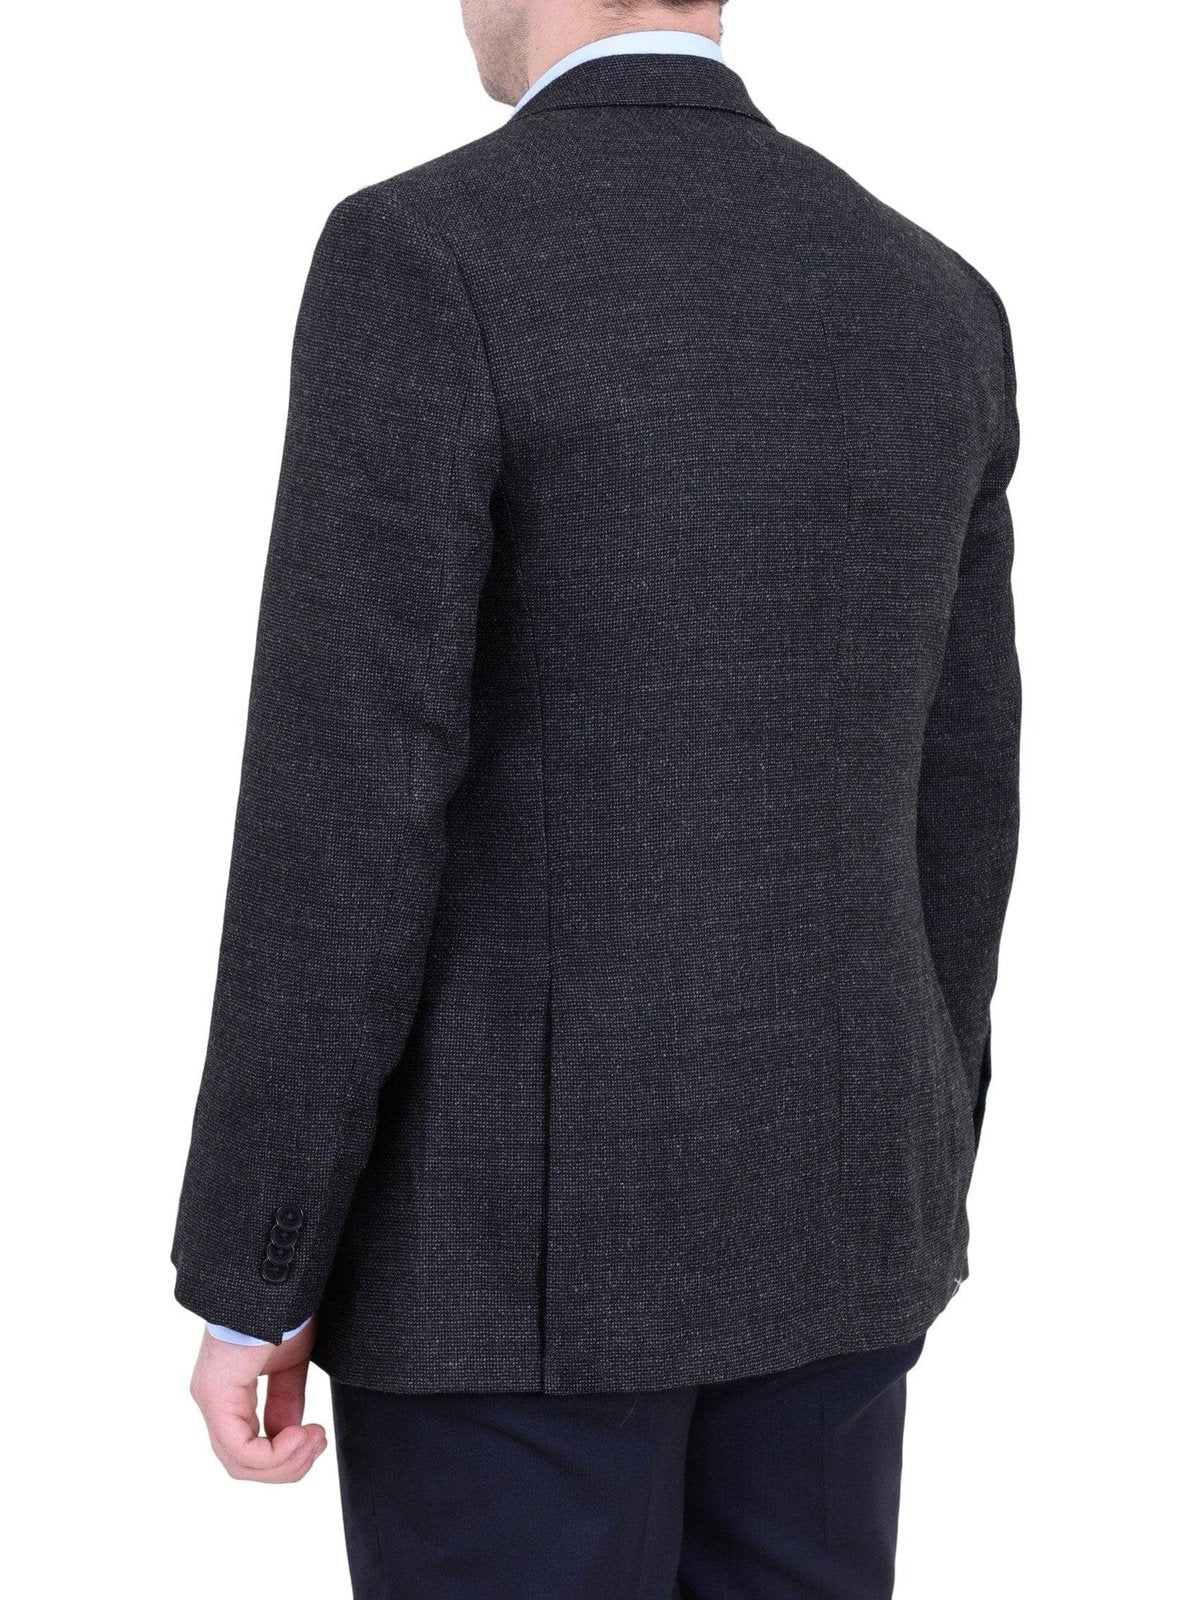 Tommy Hilfiger BLAZERS Tommy Hilfiger Trim Fit Charcoal Textured Soft Tailored Two Button Wool Blazer